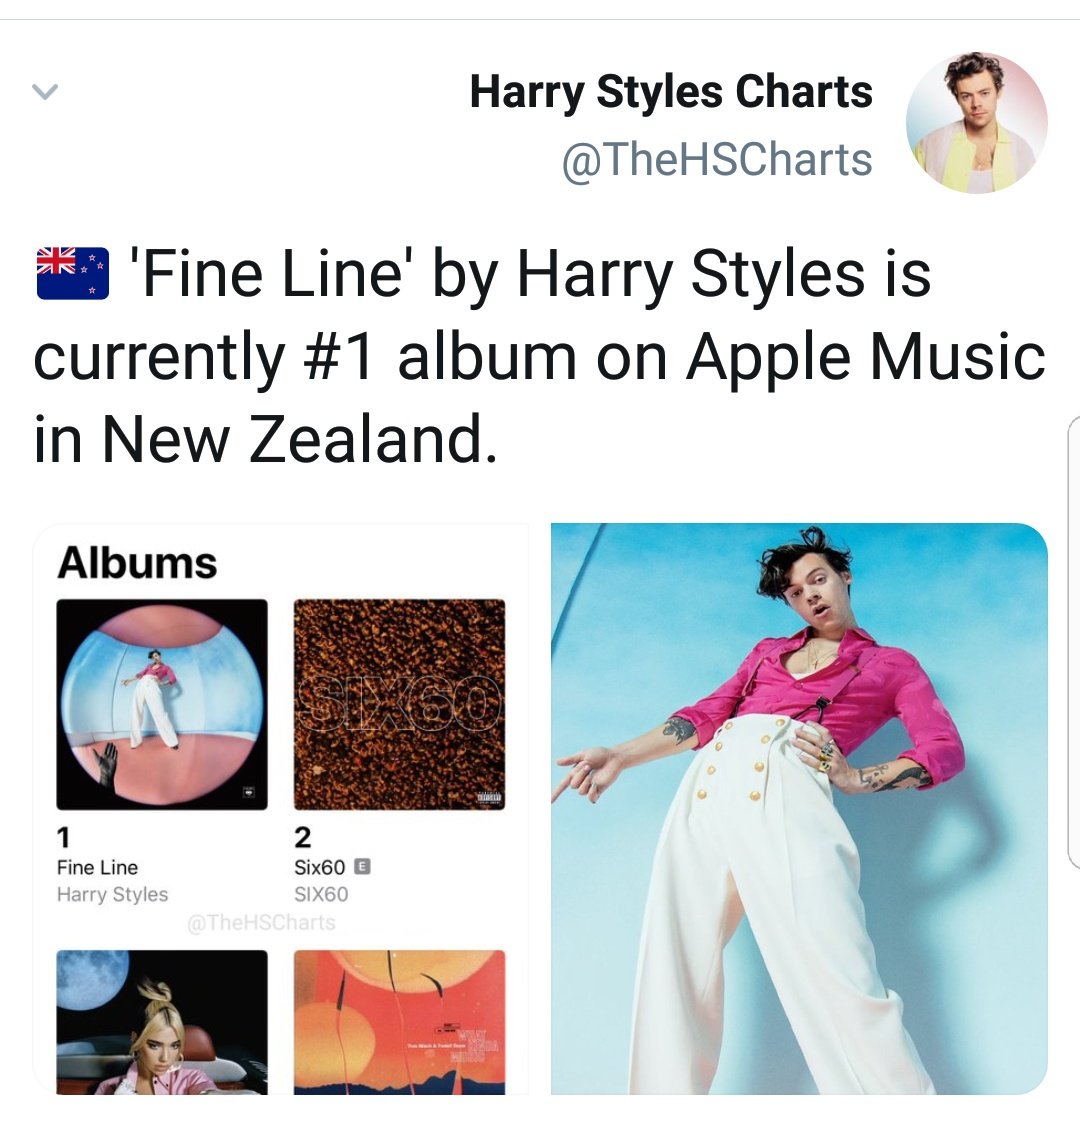 Over 4 months after its release, "Fine Line" is #1 on Apple music New Zealand (albums)!